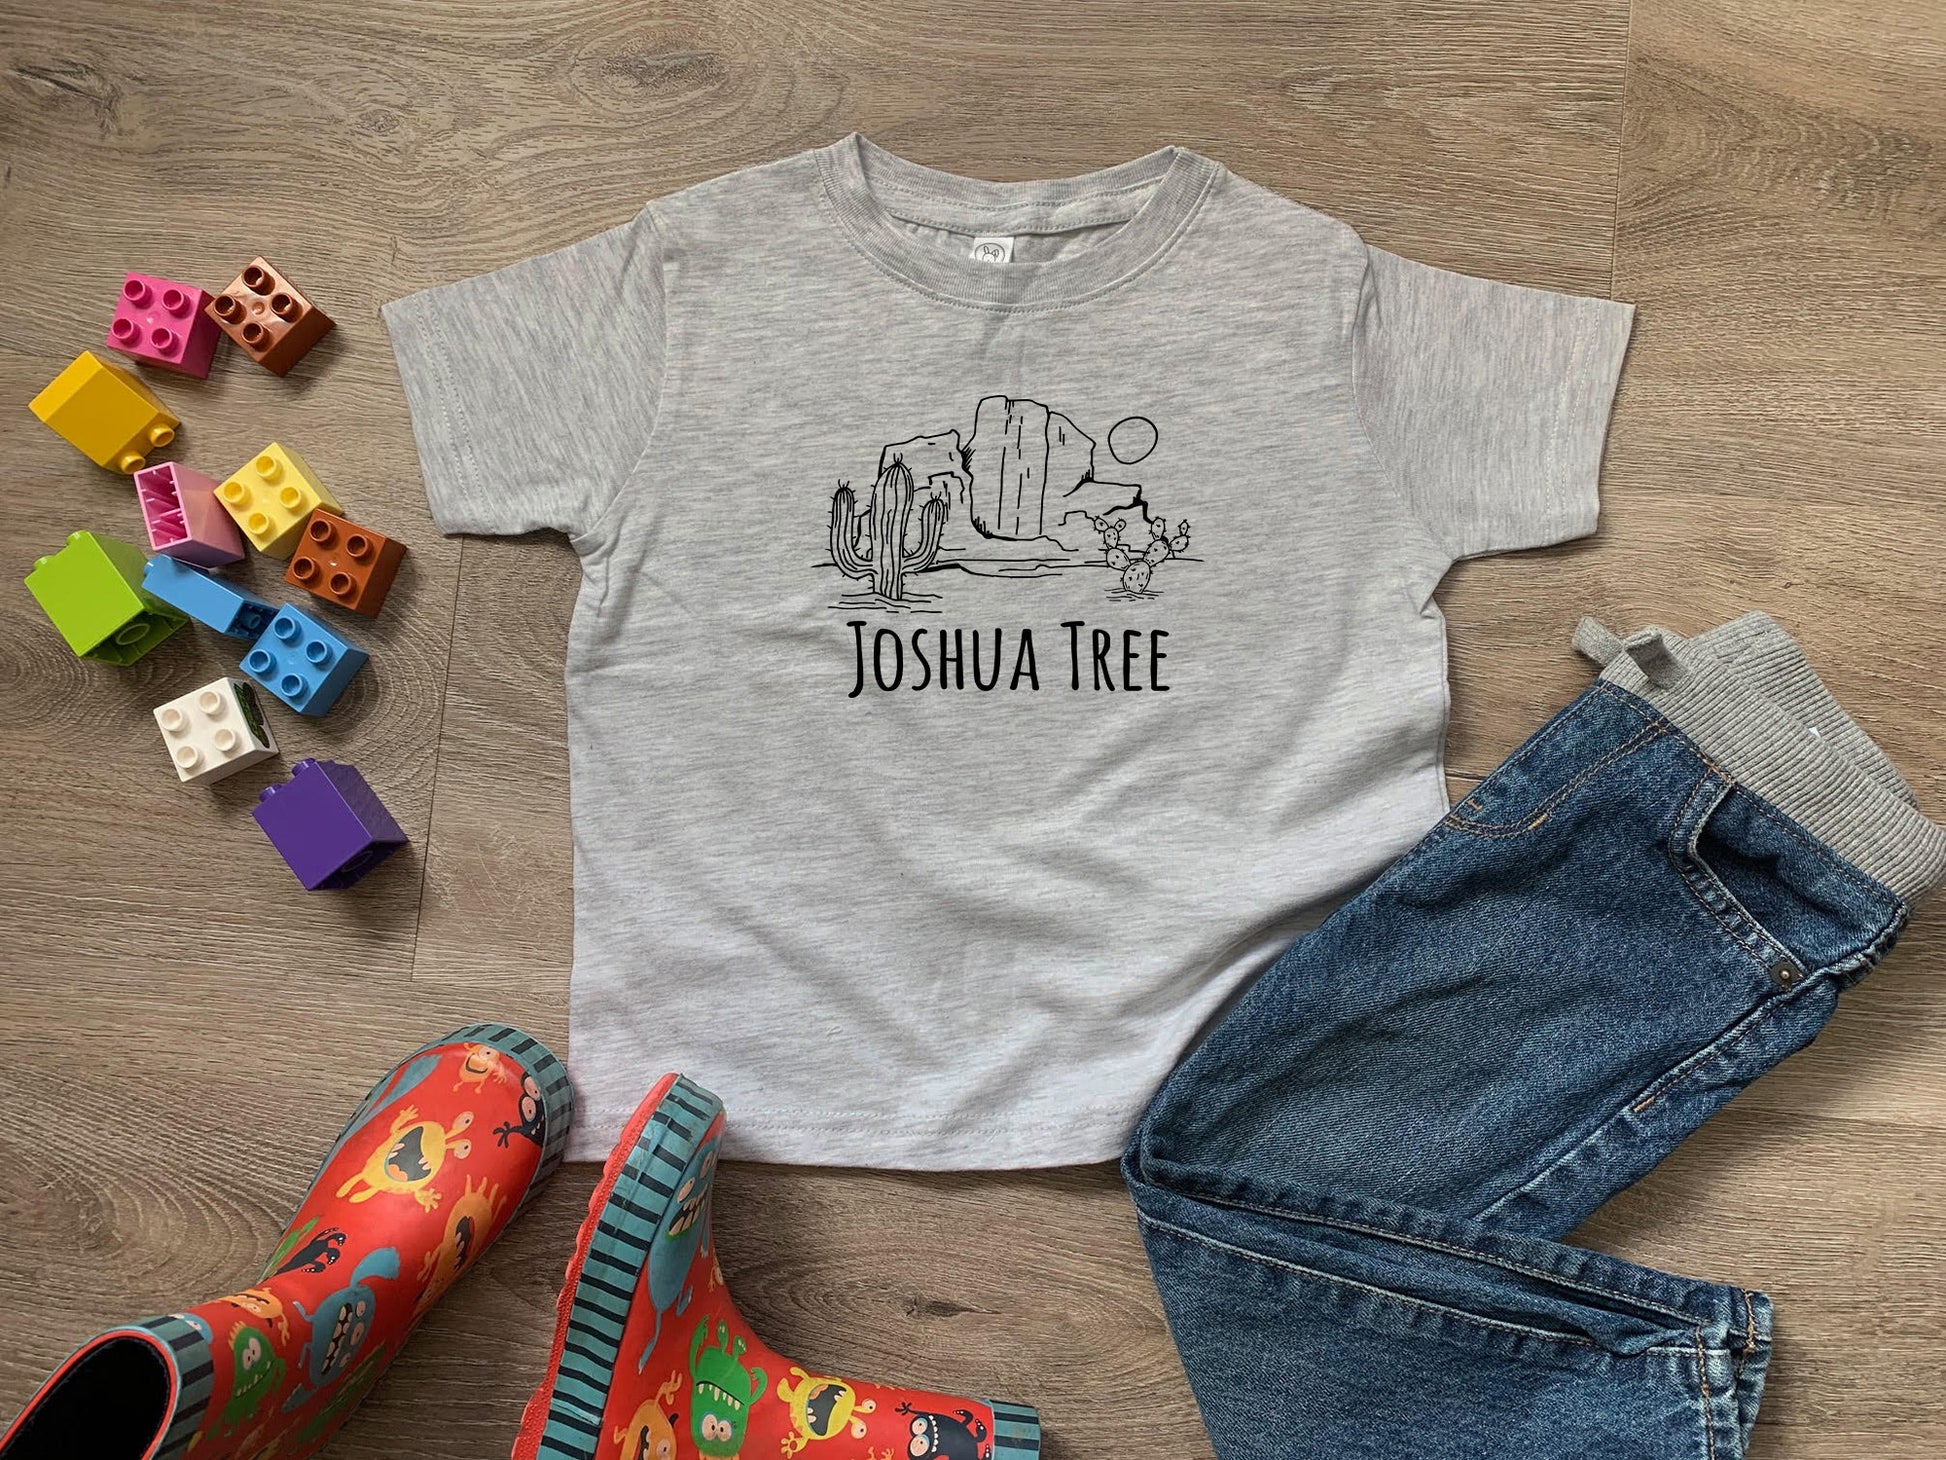 a t - shirt that says joshua tree next to a pair of jeans and rubber